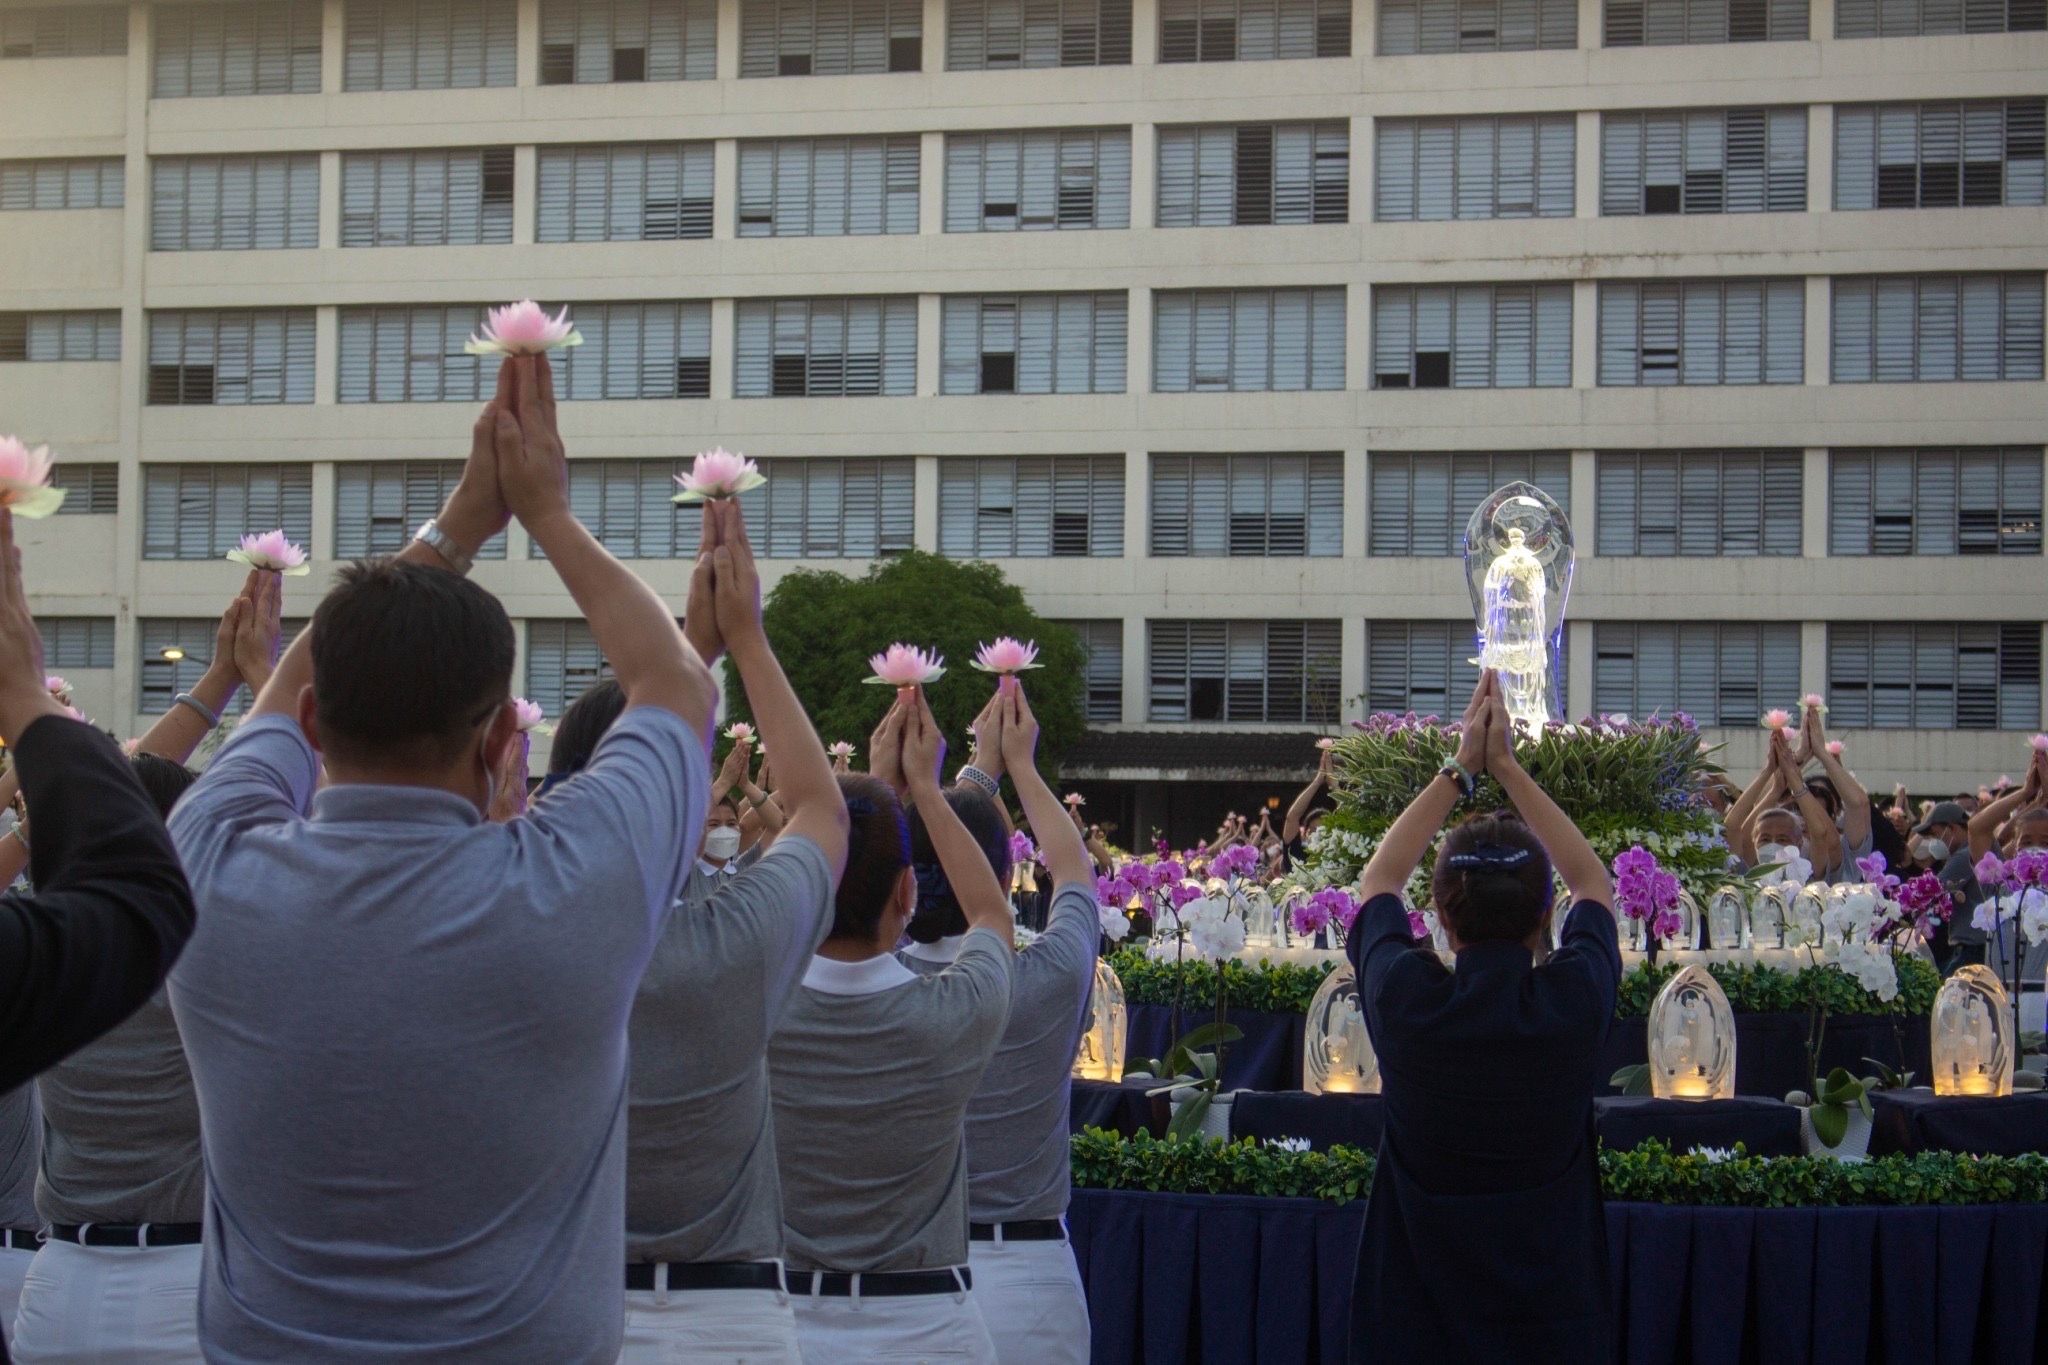 Volunteers raise lotus flower candles as a symbol of hope in challenging times. 【Photo by Mavi Saldonido】